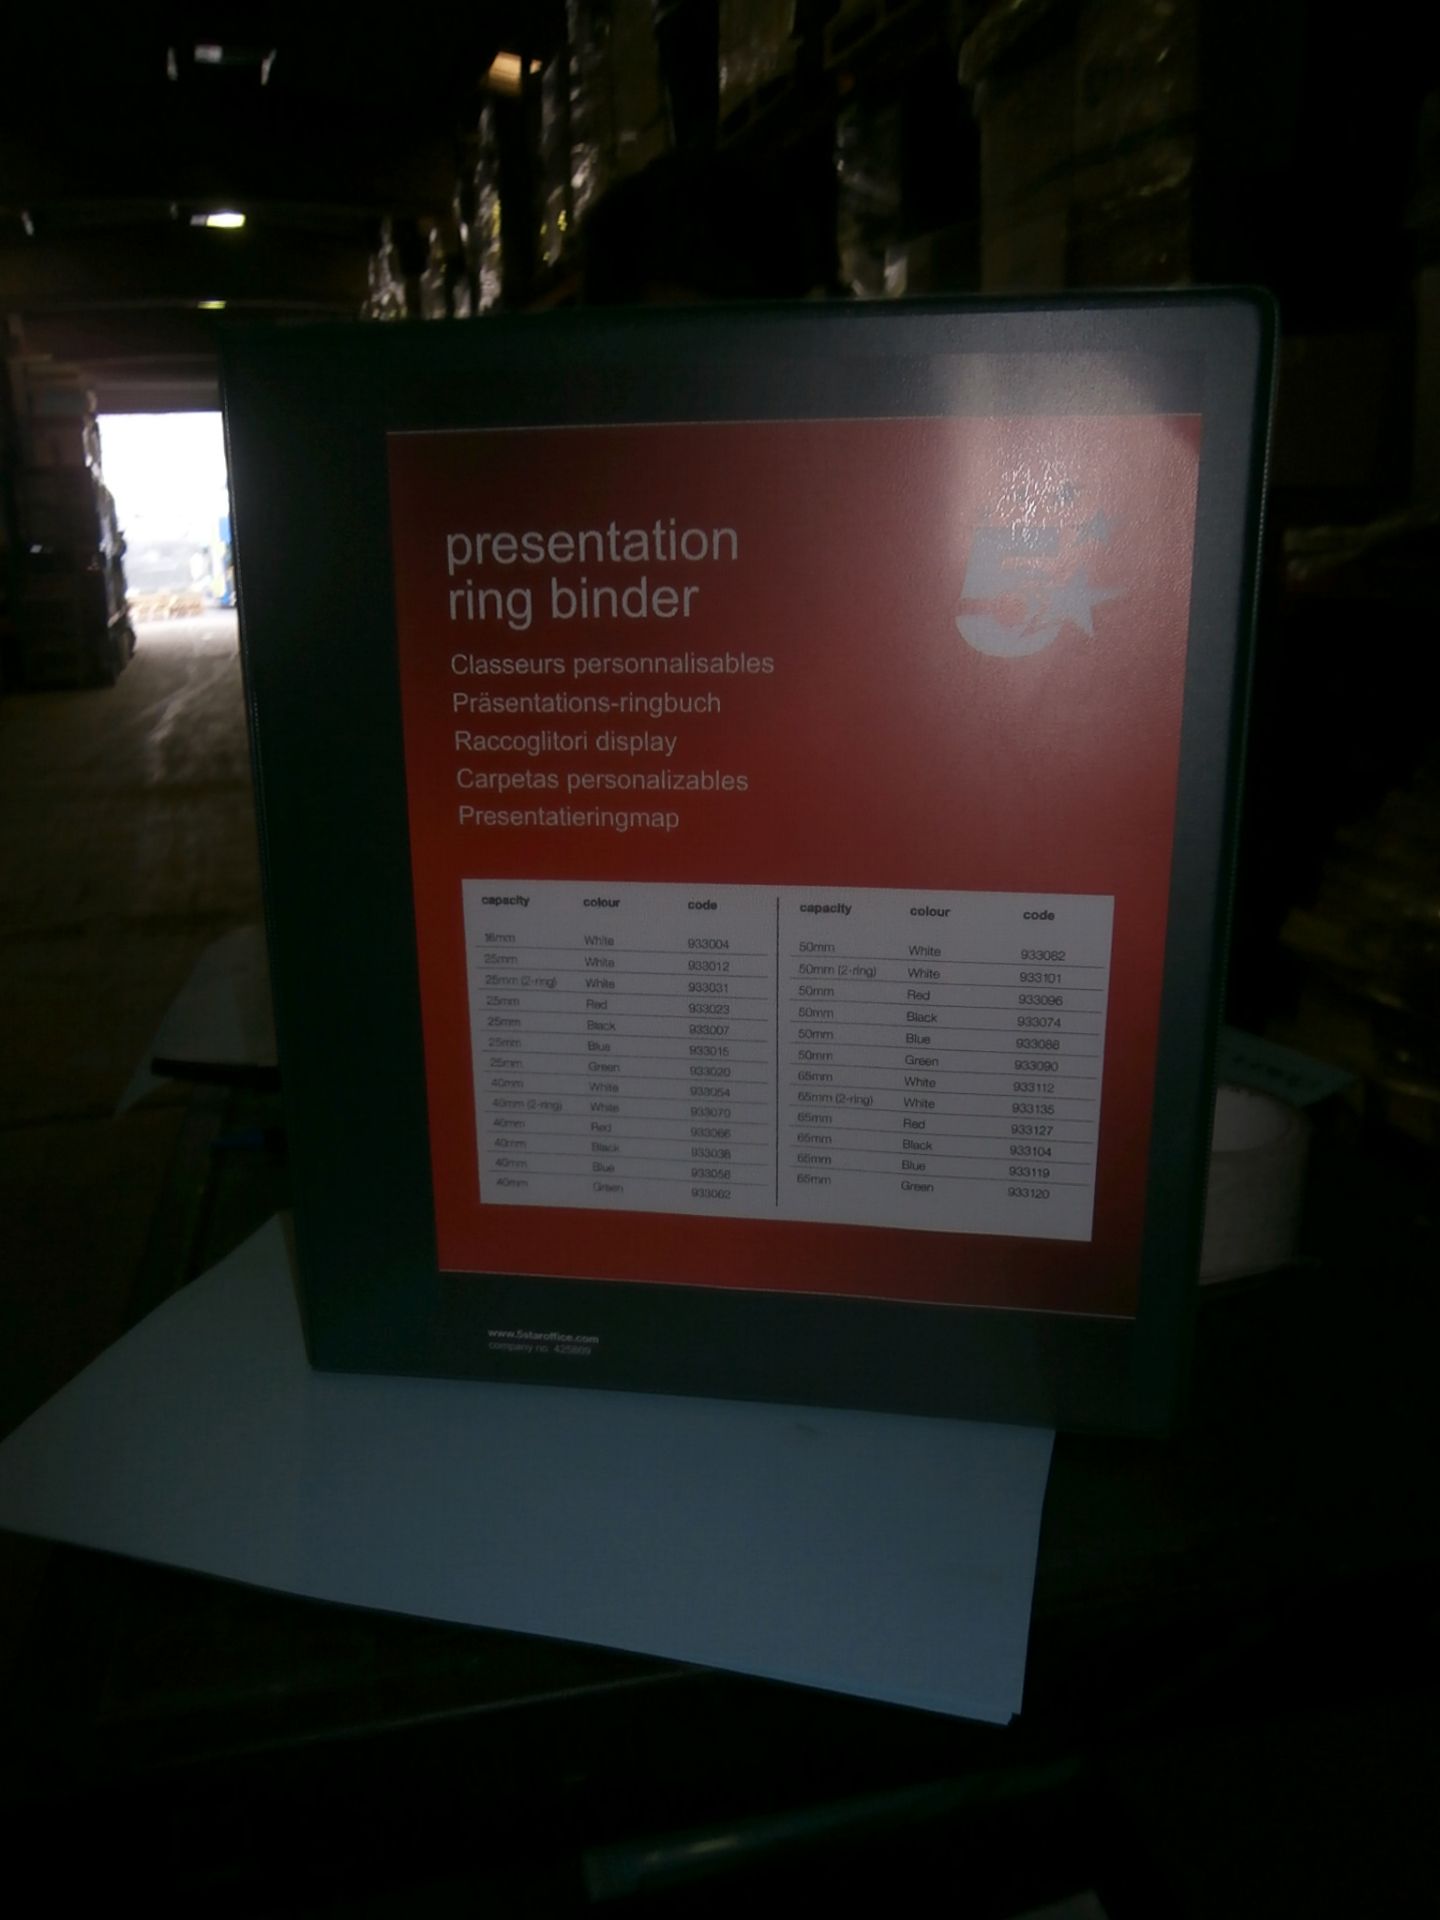 1 x Pallet of 5 Star 4D Presentation Ringbinders - Product Code 933020 (Approximately 48 Boxes of 10 - Image 2 of 2